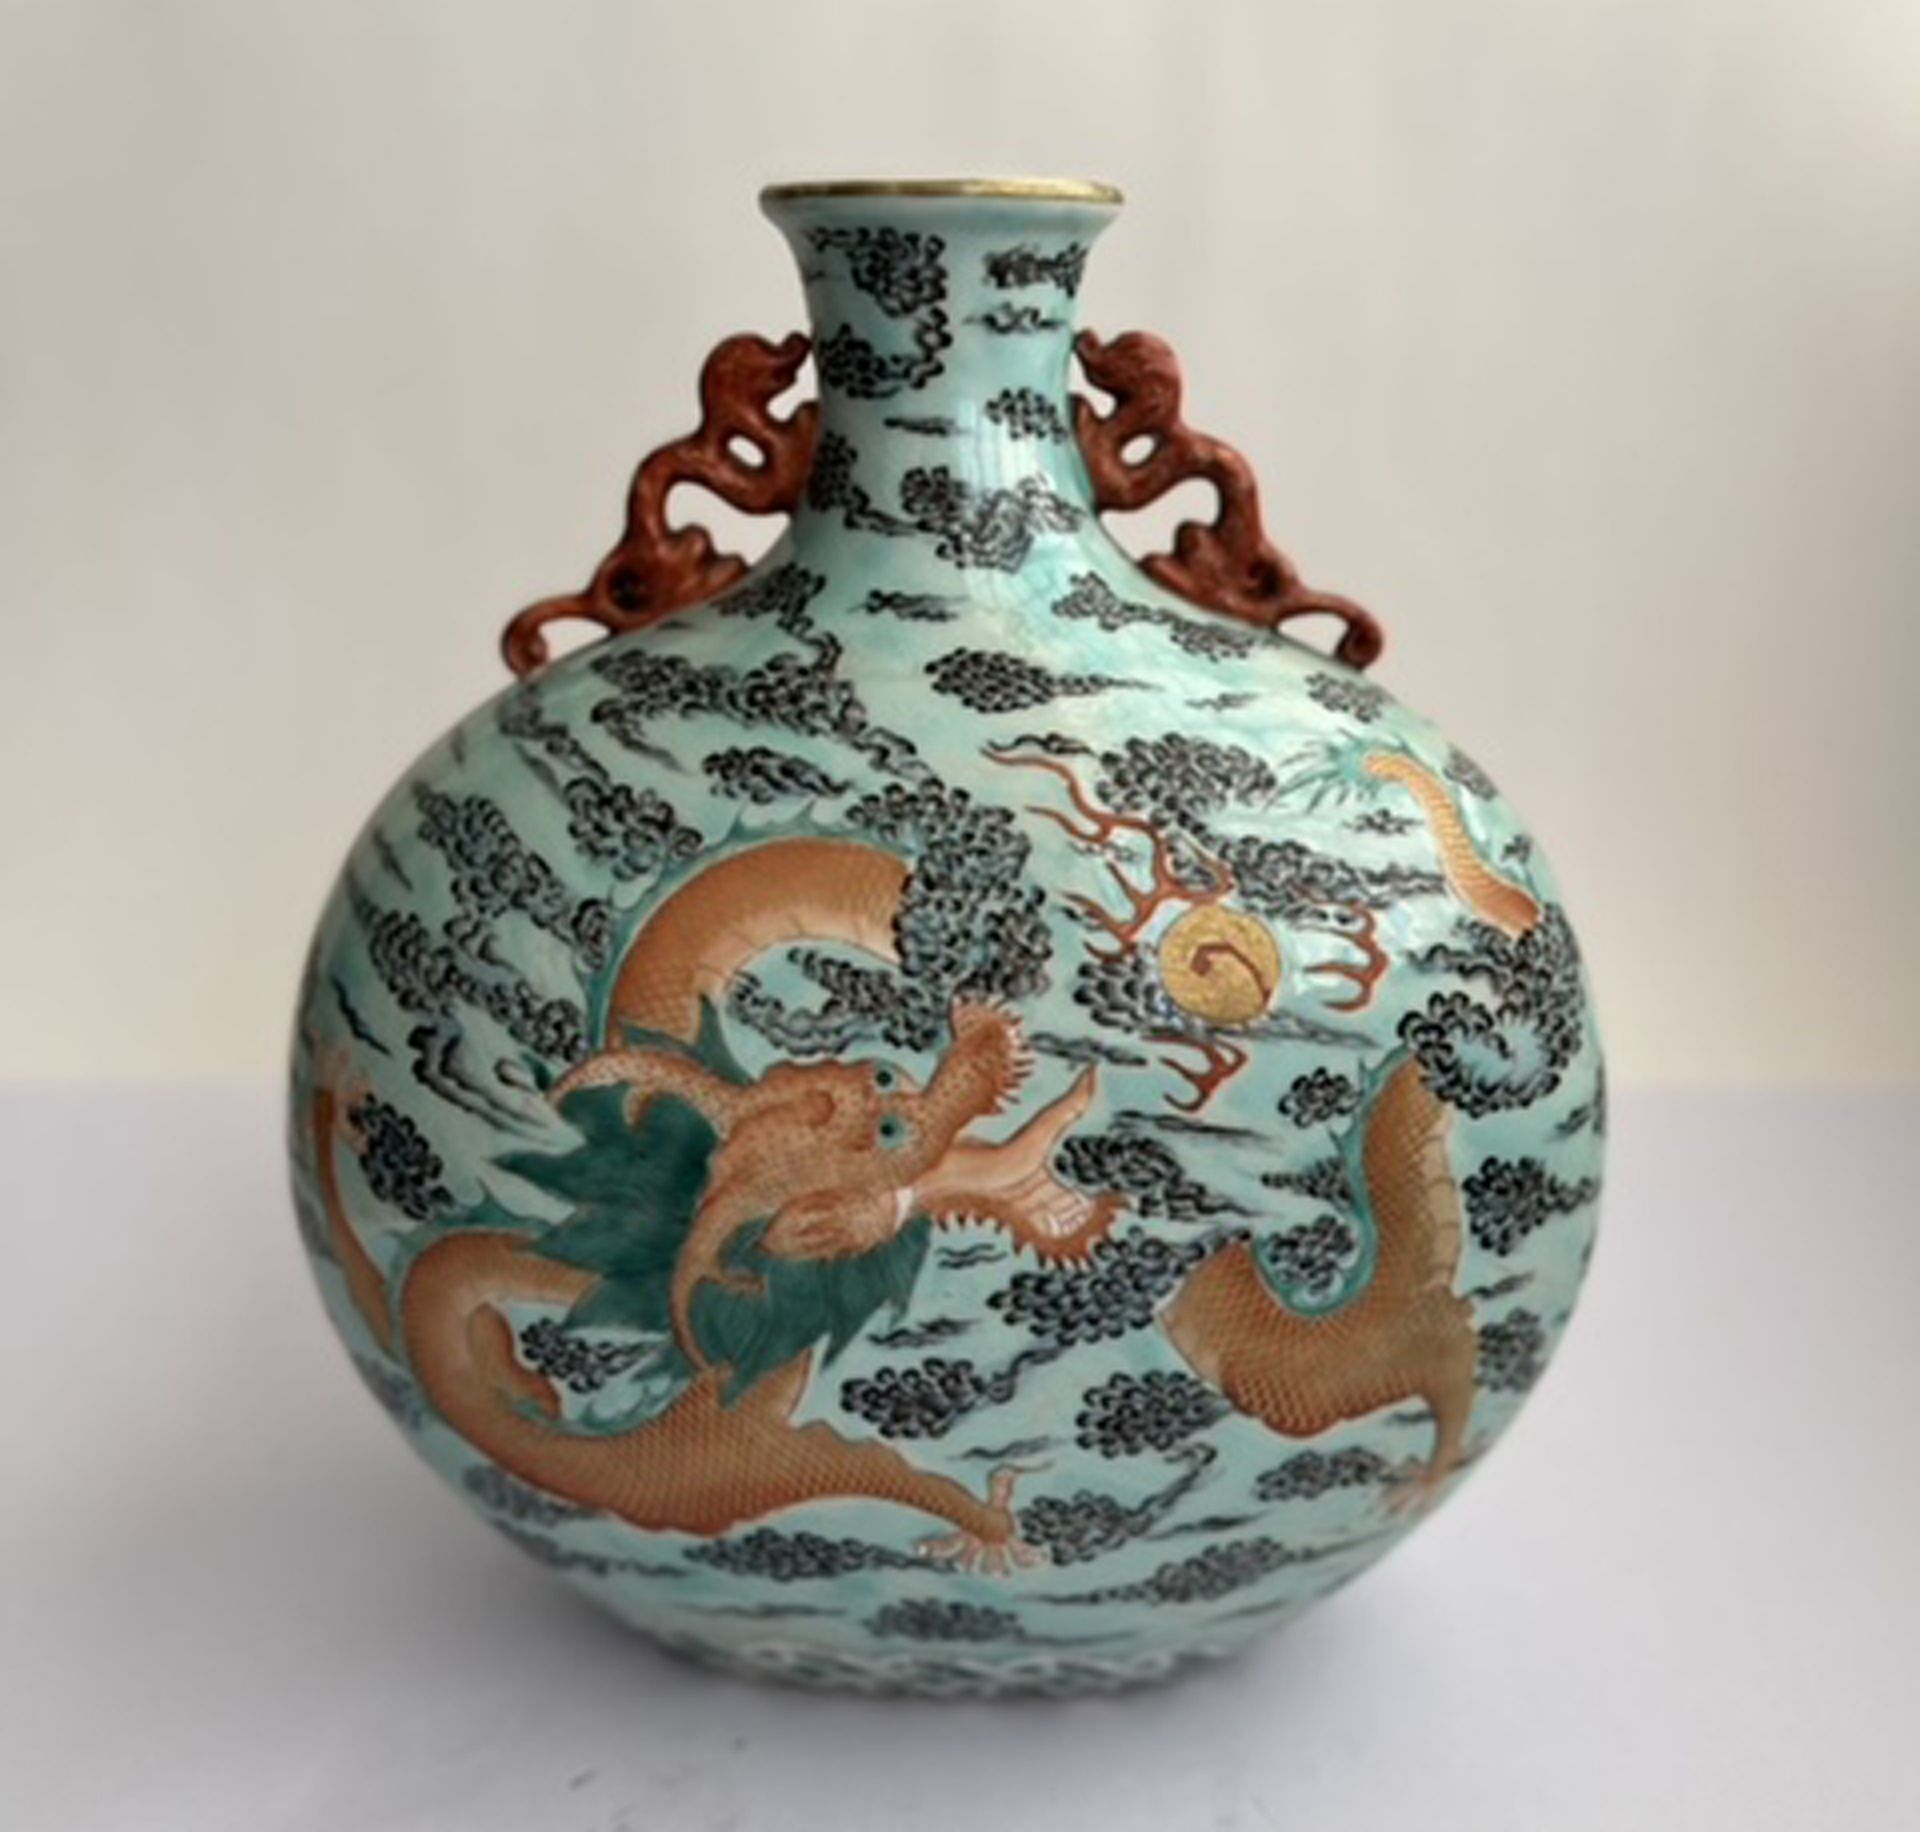 Moonflask type vase, with Dragon motif, 20th century Chinese school